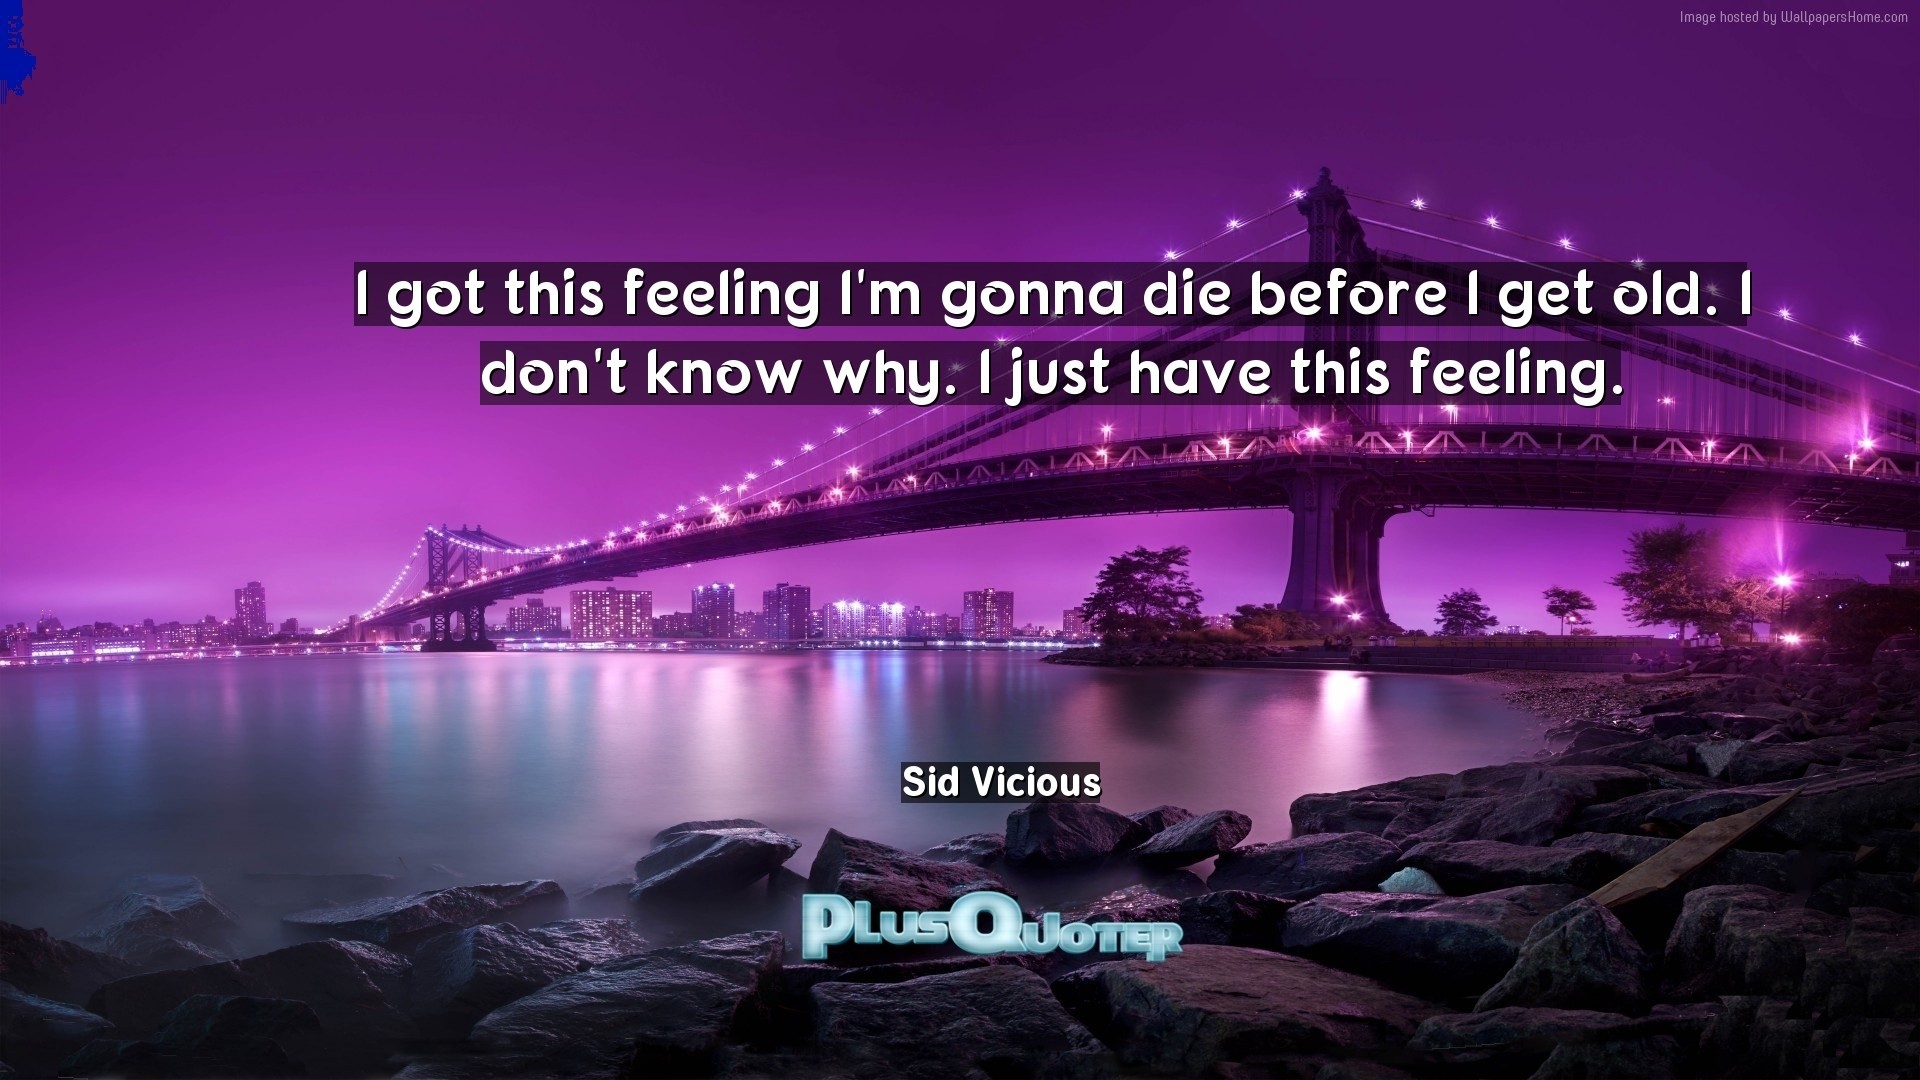 1920x1080 Download Wallpaper with inspirational Quotes- "I got this feeling I